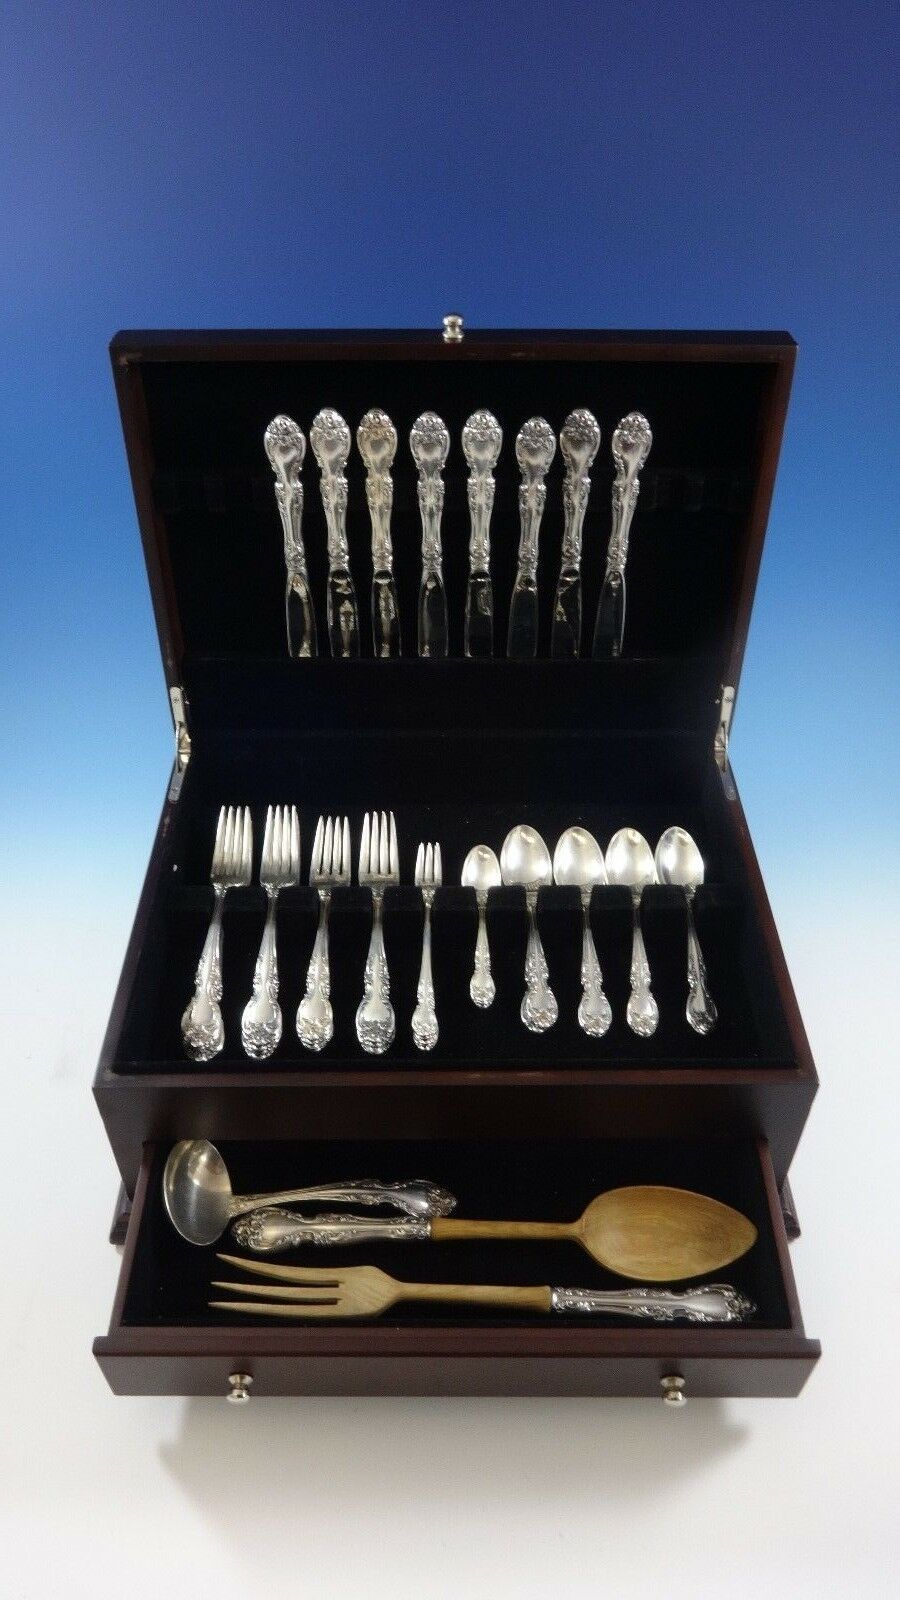 Primary image for Melrose by Gorham Sterling Silver Flatware Set For 8 Service 51 Pieces